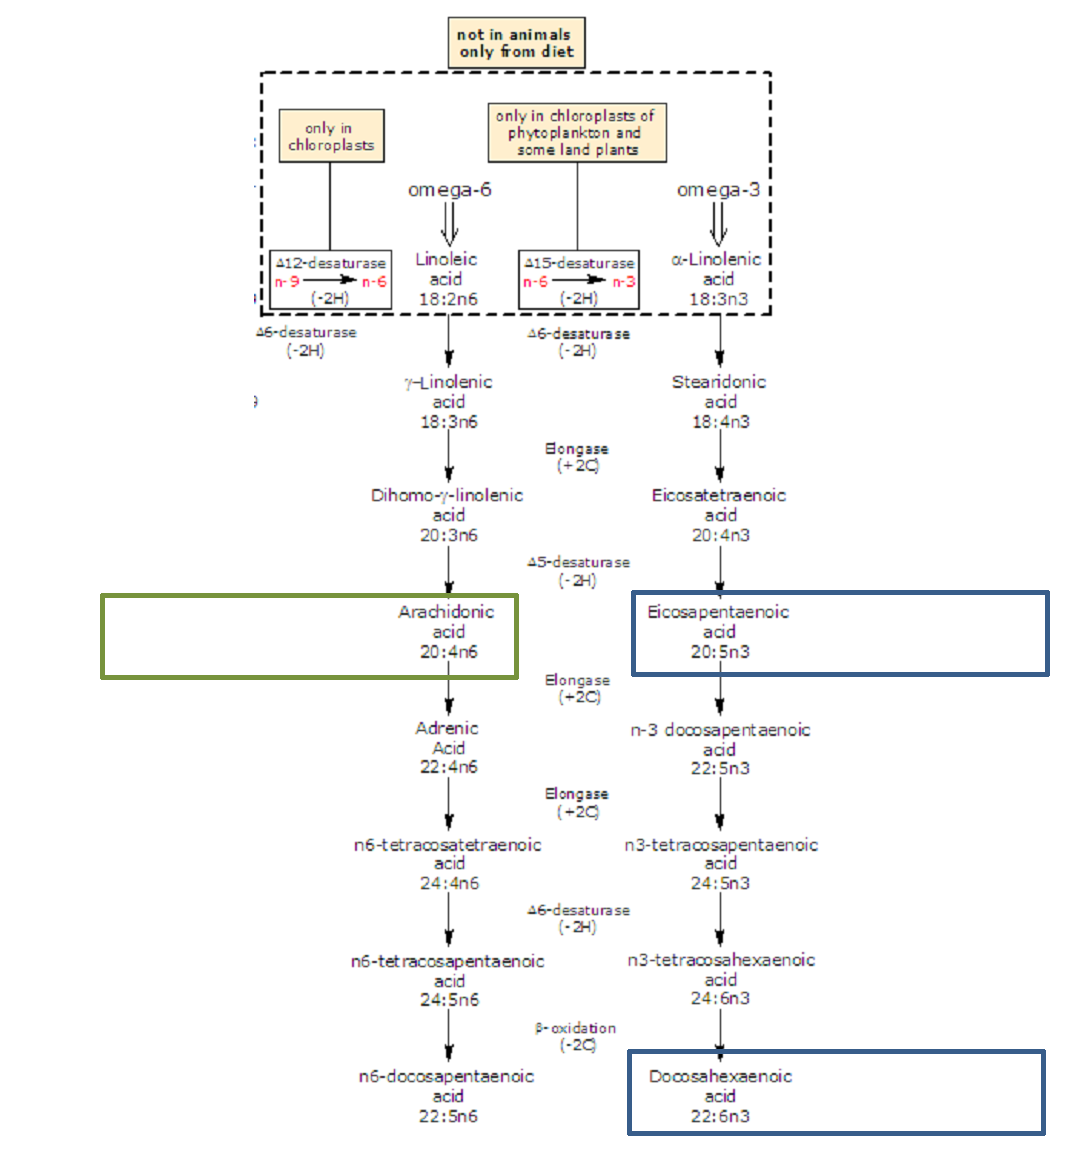 metabolic pathway of omega 3 and omega 6